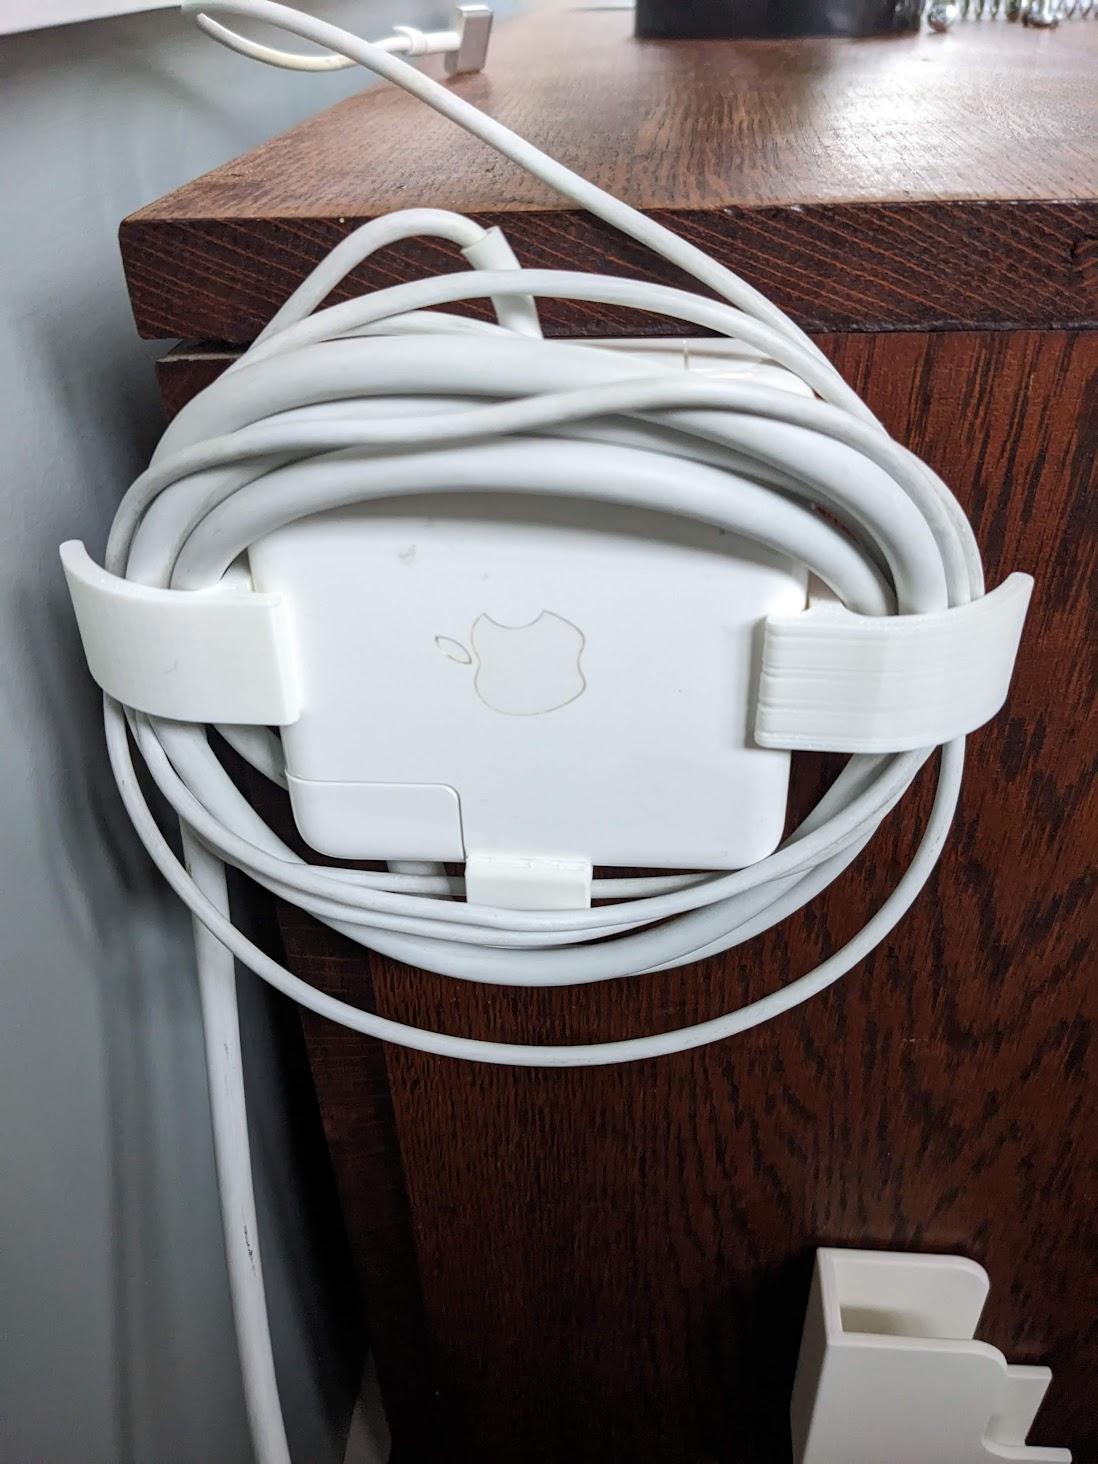 MacBook Pro 85w Magsafe 2 Charger Mount 3d model